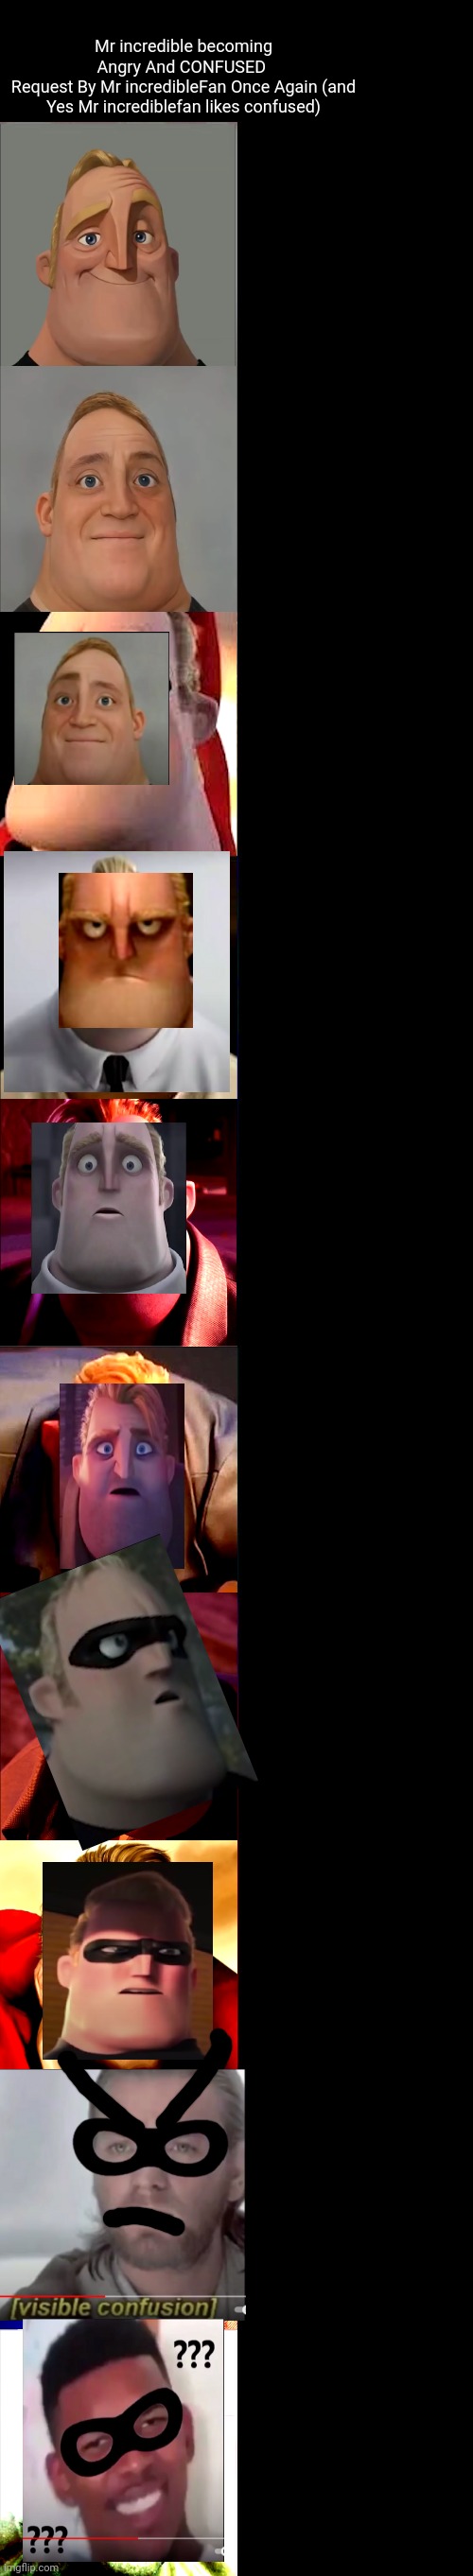 Haha Yes | Mr incredible becoming Angry And CONFUSED 
Request By Mr incredibleFan Once Again (and Yes Mr incrediblefan likes confused) | image tagged in dank memes | made w/ Imgflip meme maker